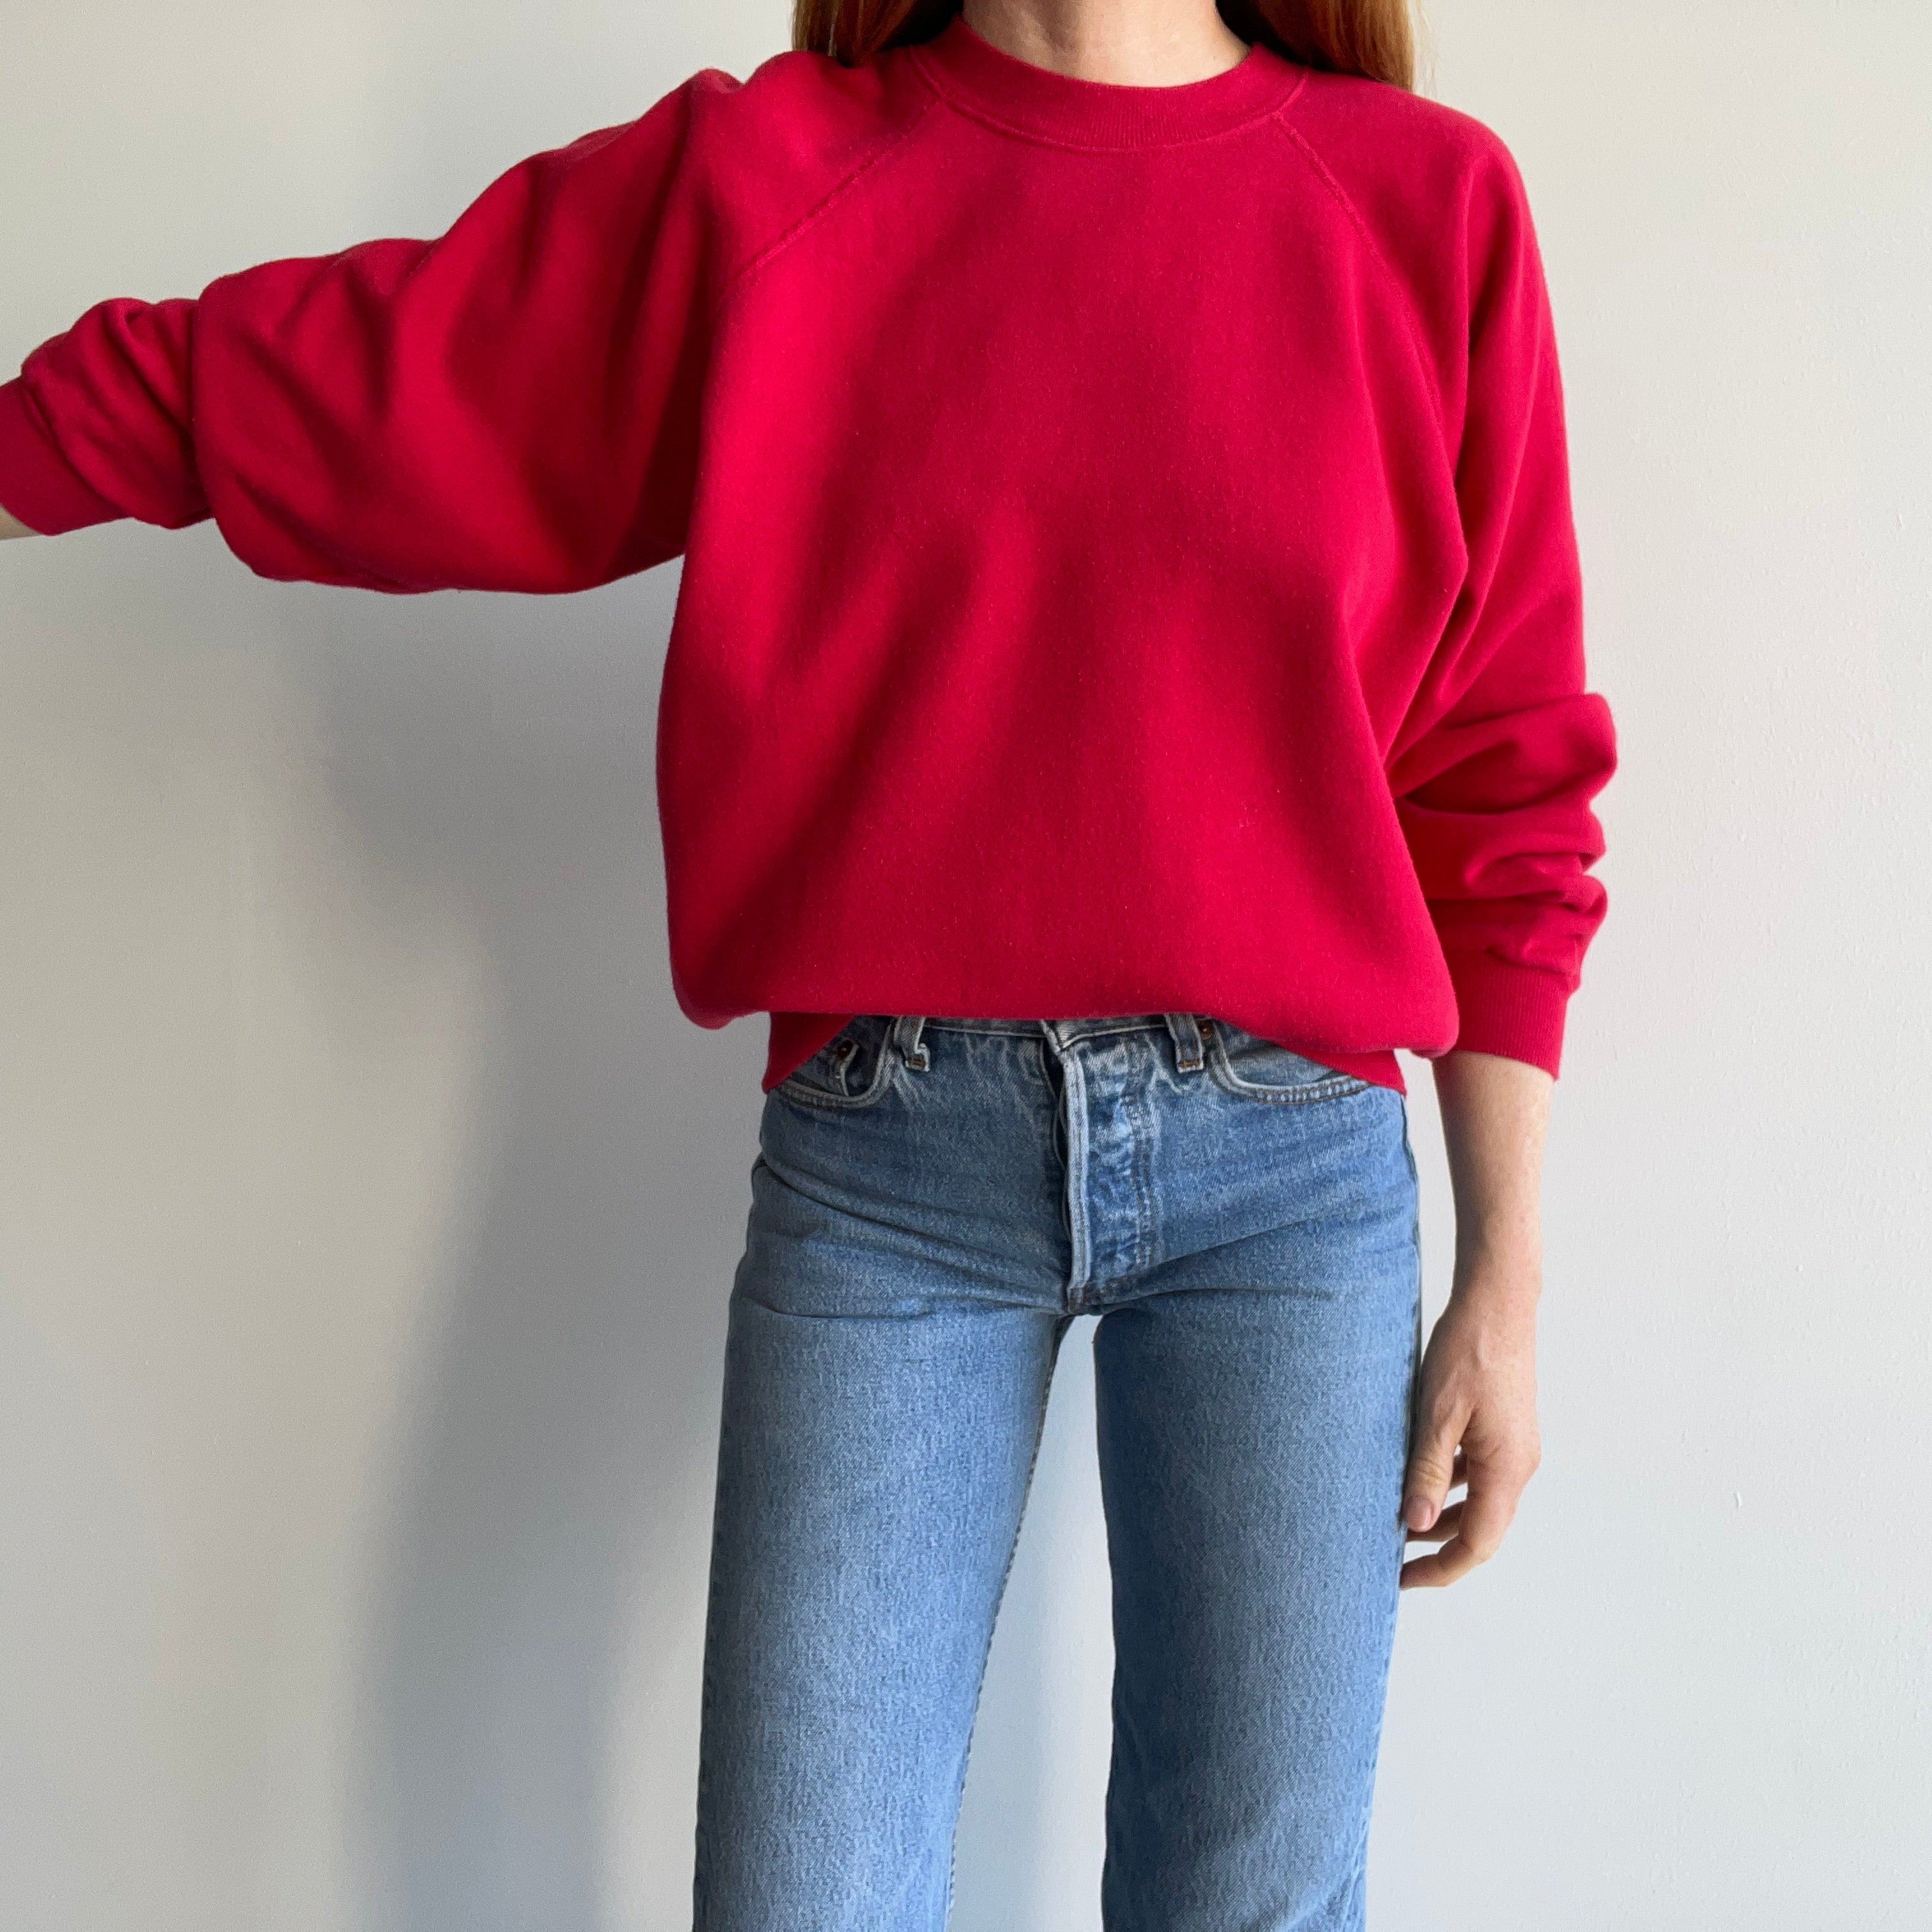 1980s Red/Pink/But More Red Hanes Raglan with a Drop Pit